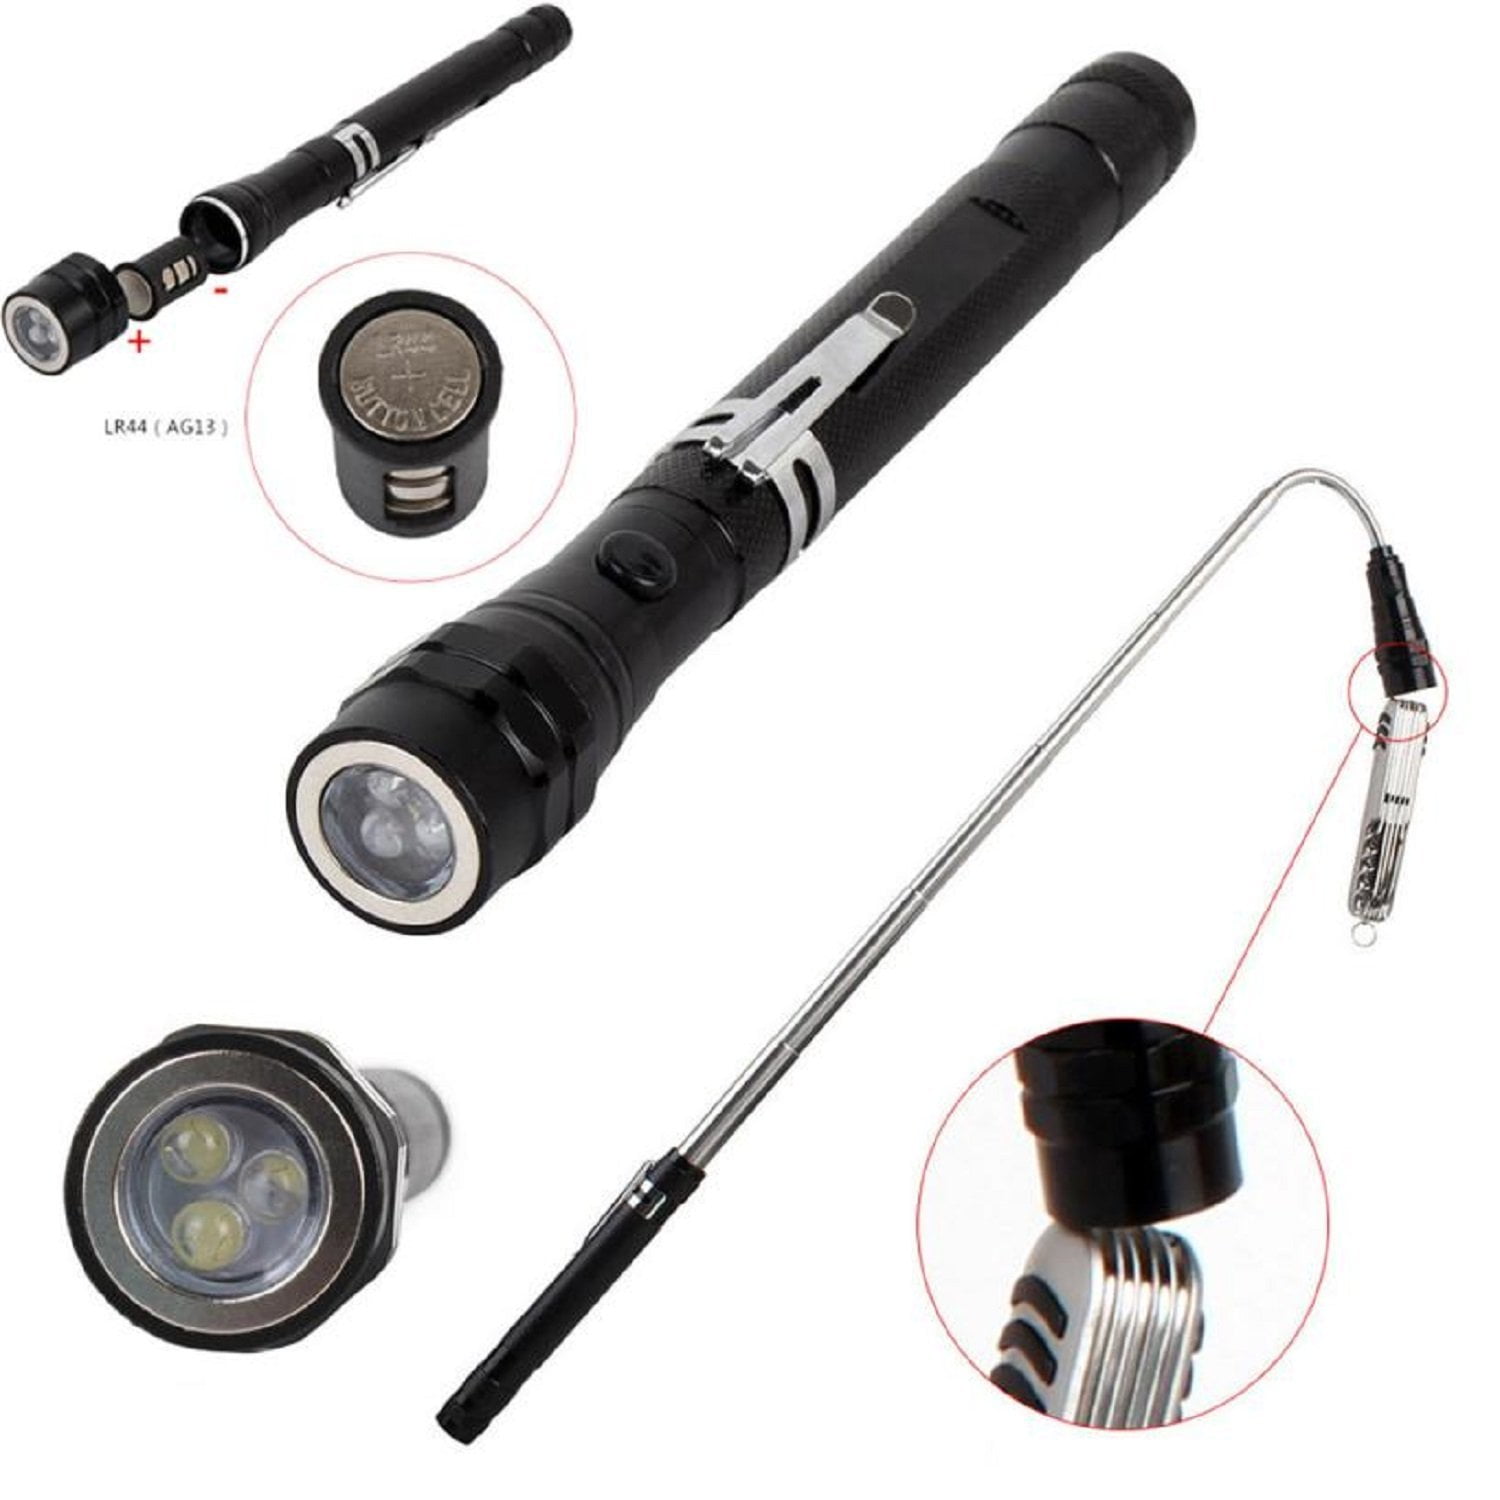 Details about   6 LED FLASHLIGHT WORK LIGHT WITH MAGNET BASE & POCKET CLIP WITH BATTERIES 3 PCS 